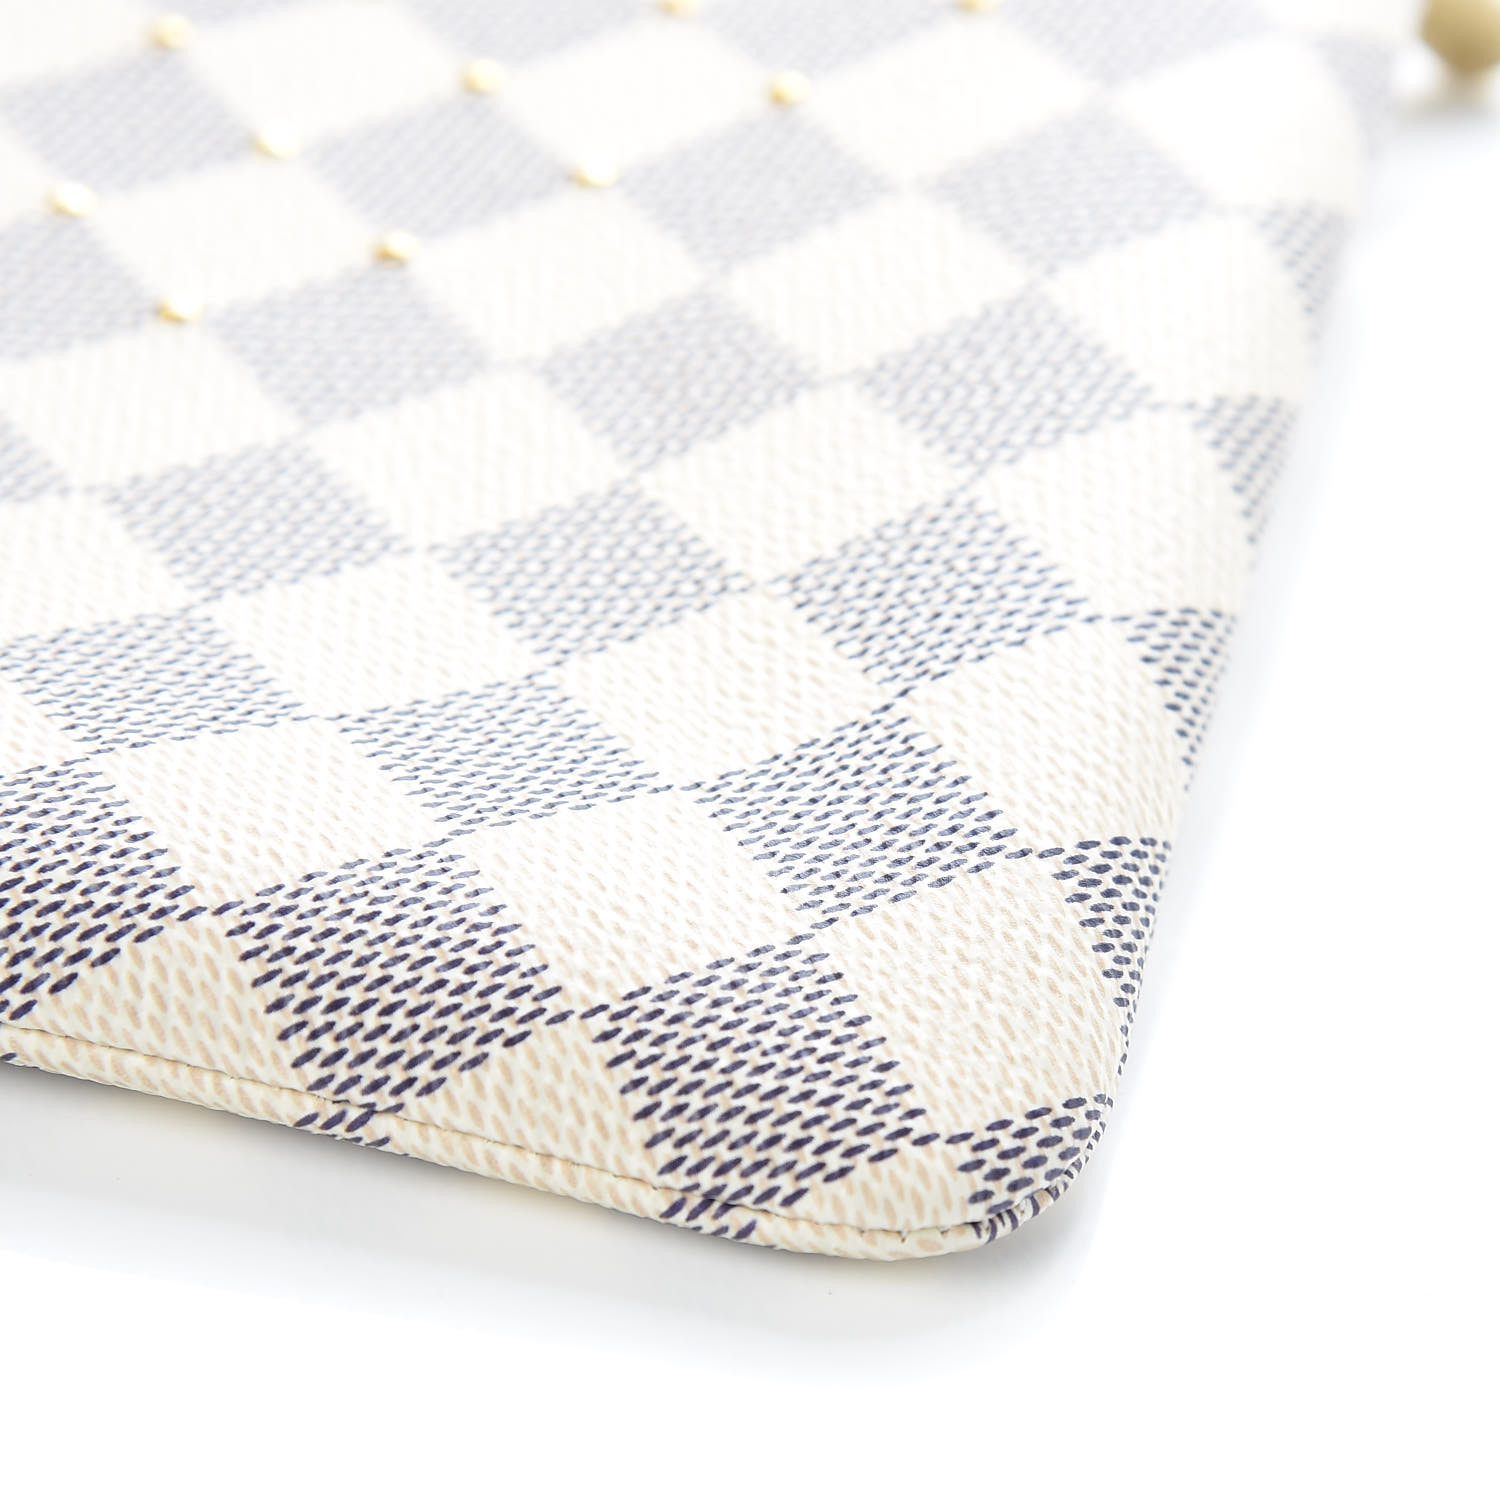 Louis Vuitton Damier Azur Canvas Cosmetic Pouch For Sale at 1stDibs